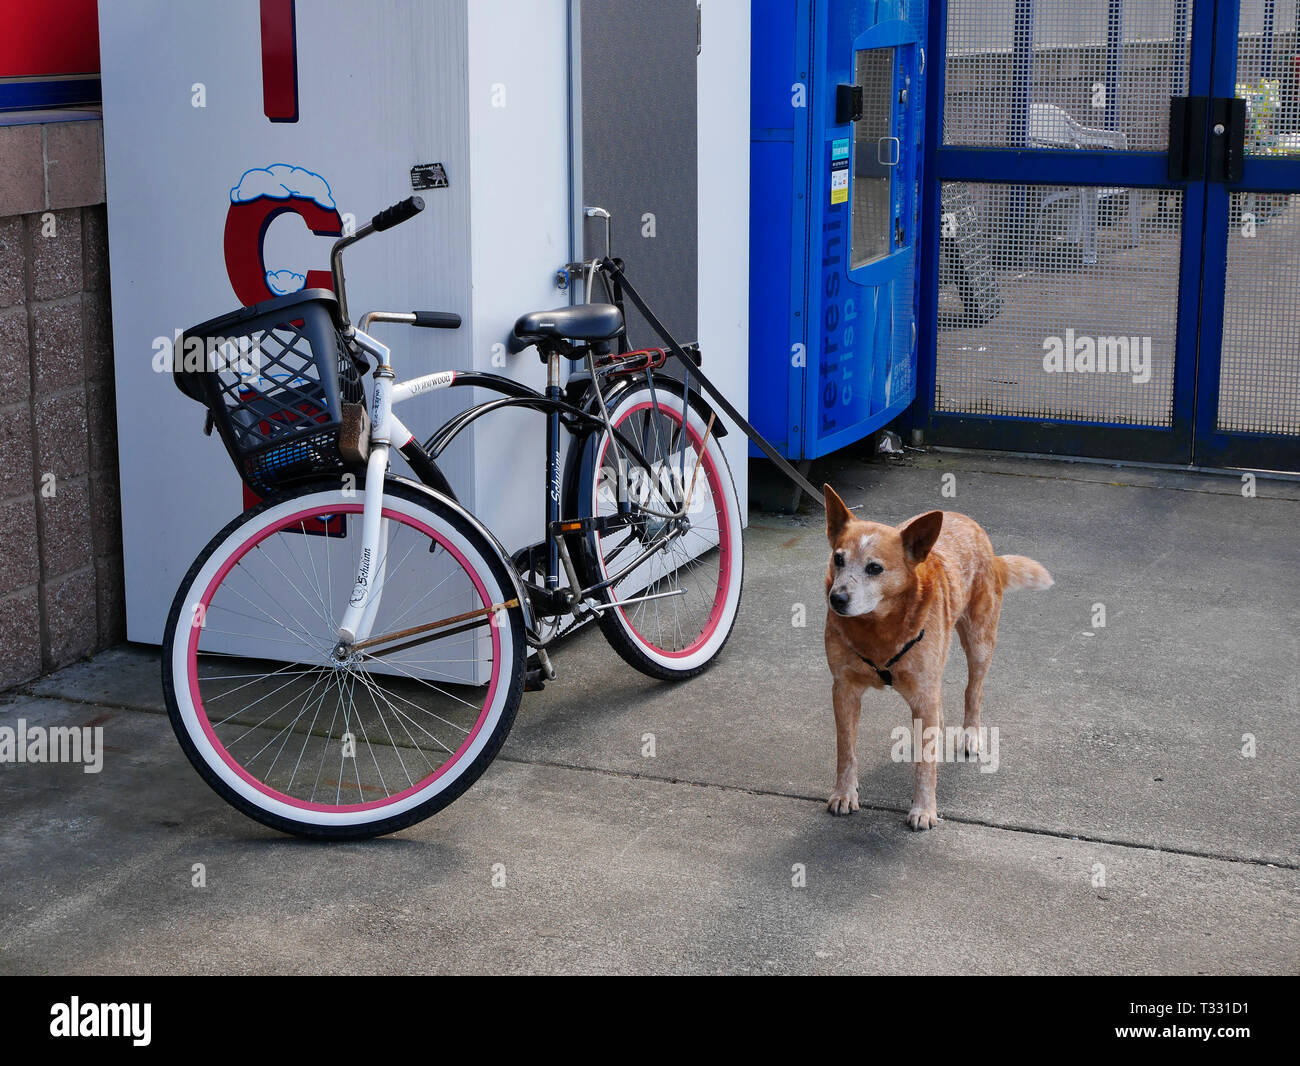 A bicycle and a dog on a sidewalk at a store. Stock Photo